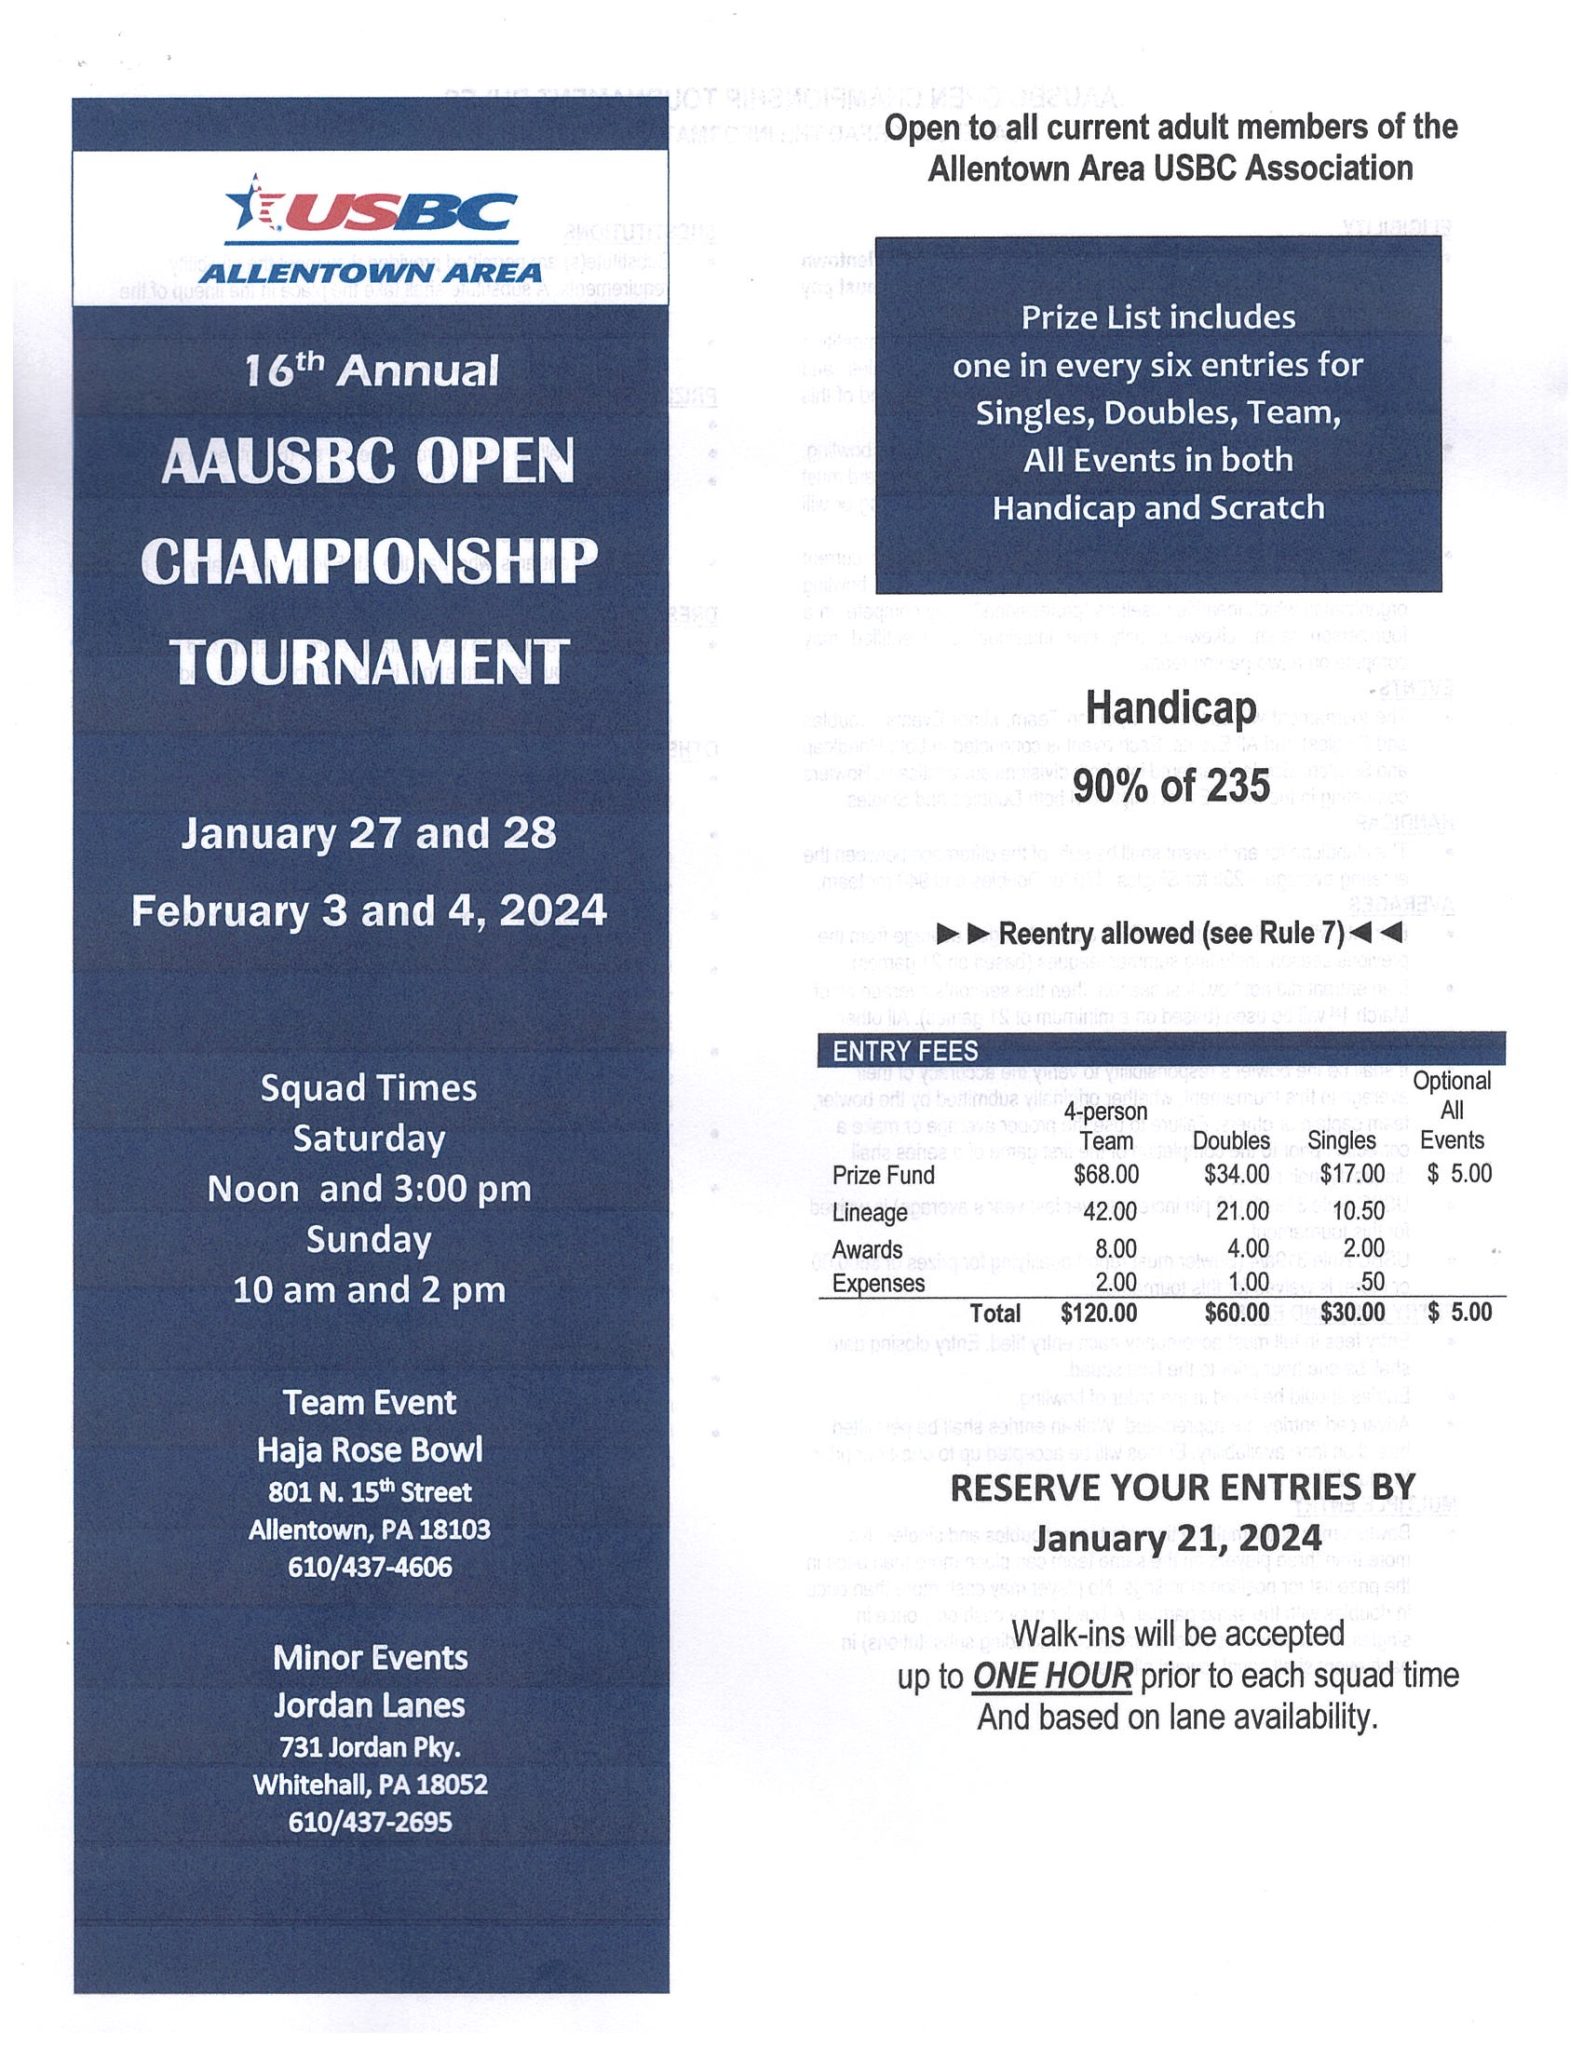 16th Annual AAUSBC Open Championship Tournament 6